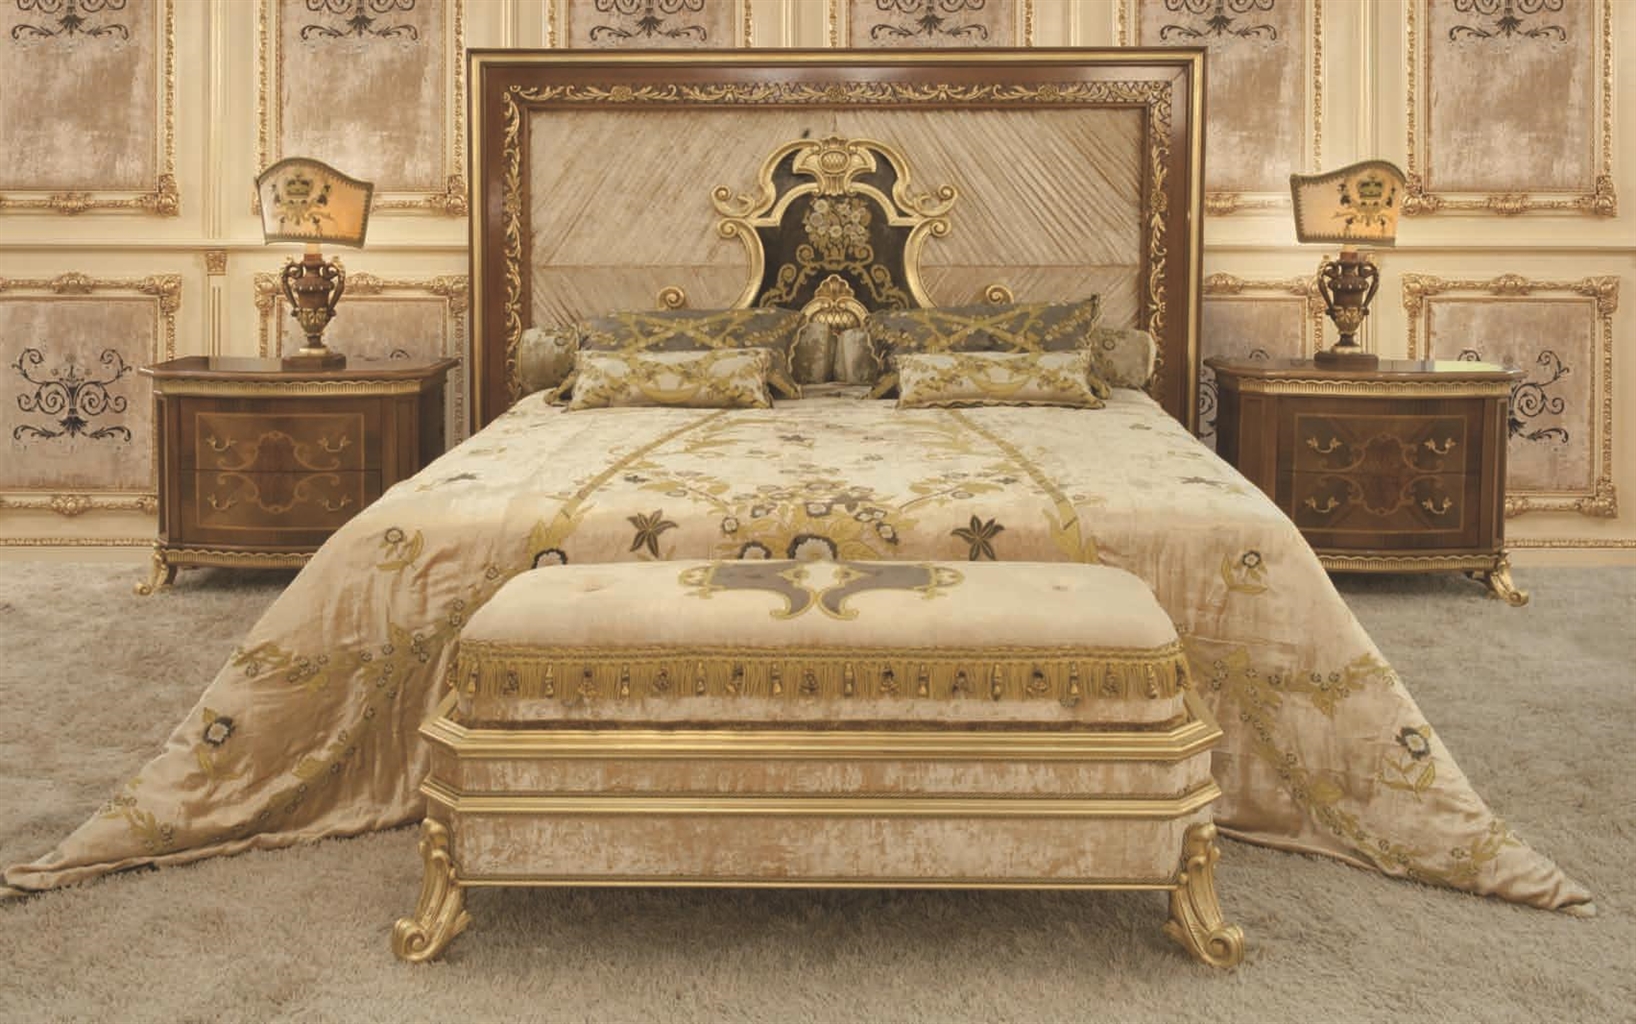 BEDS - Queen, King & California King Sizes Noble Italian Bed with Surround King Sized Headboard